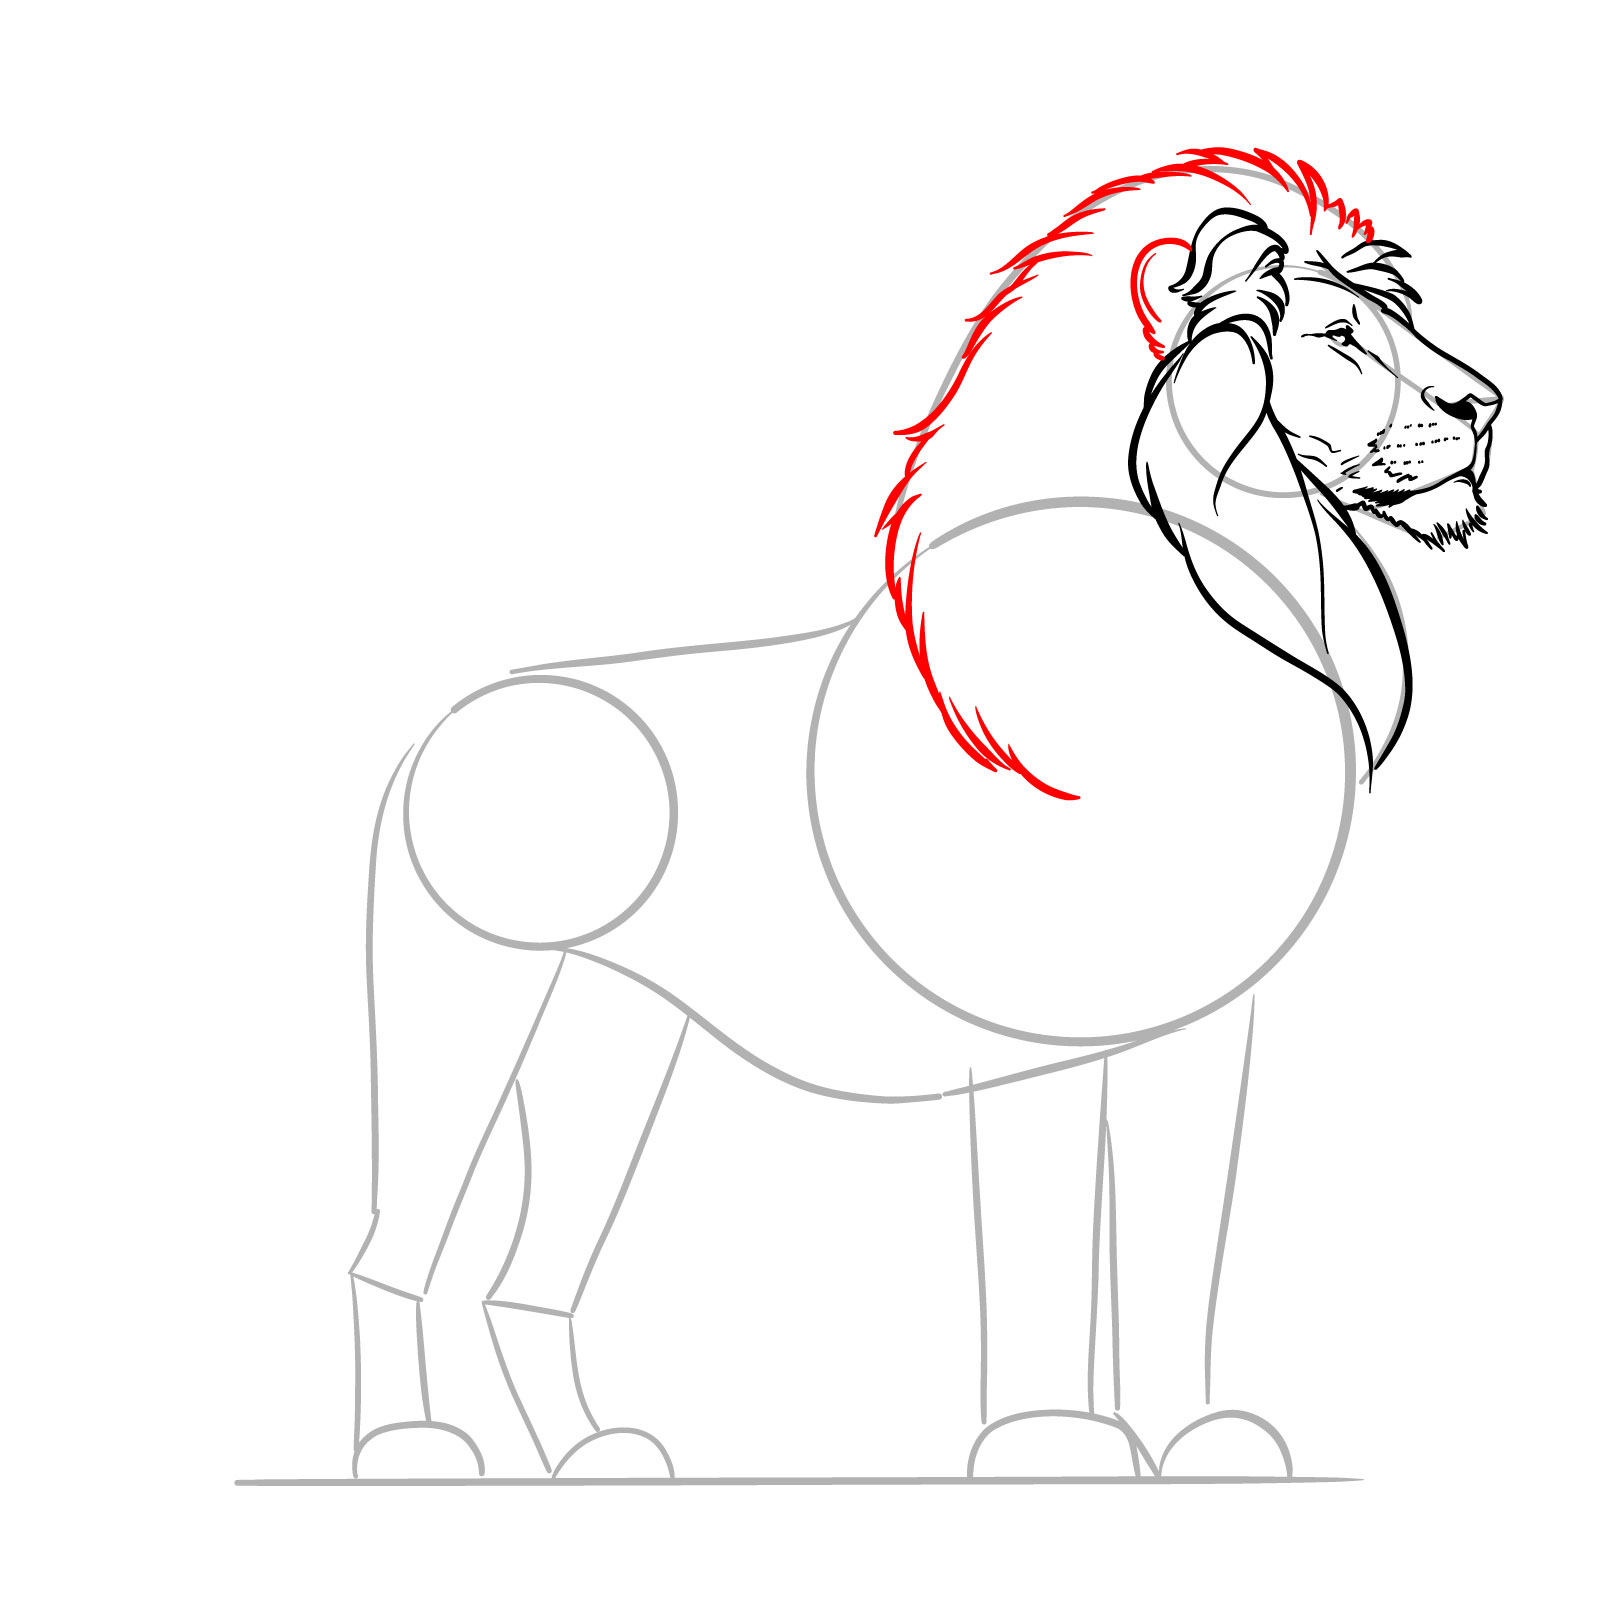 Drawing the ear and upper mane of a standing lion - step 10